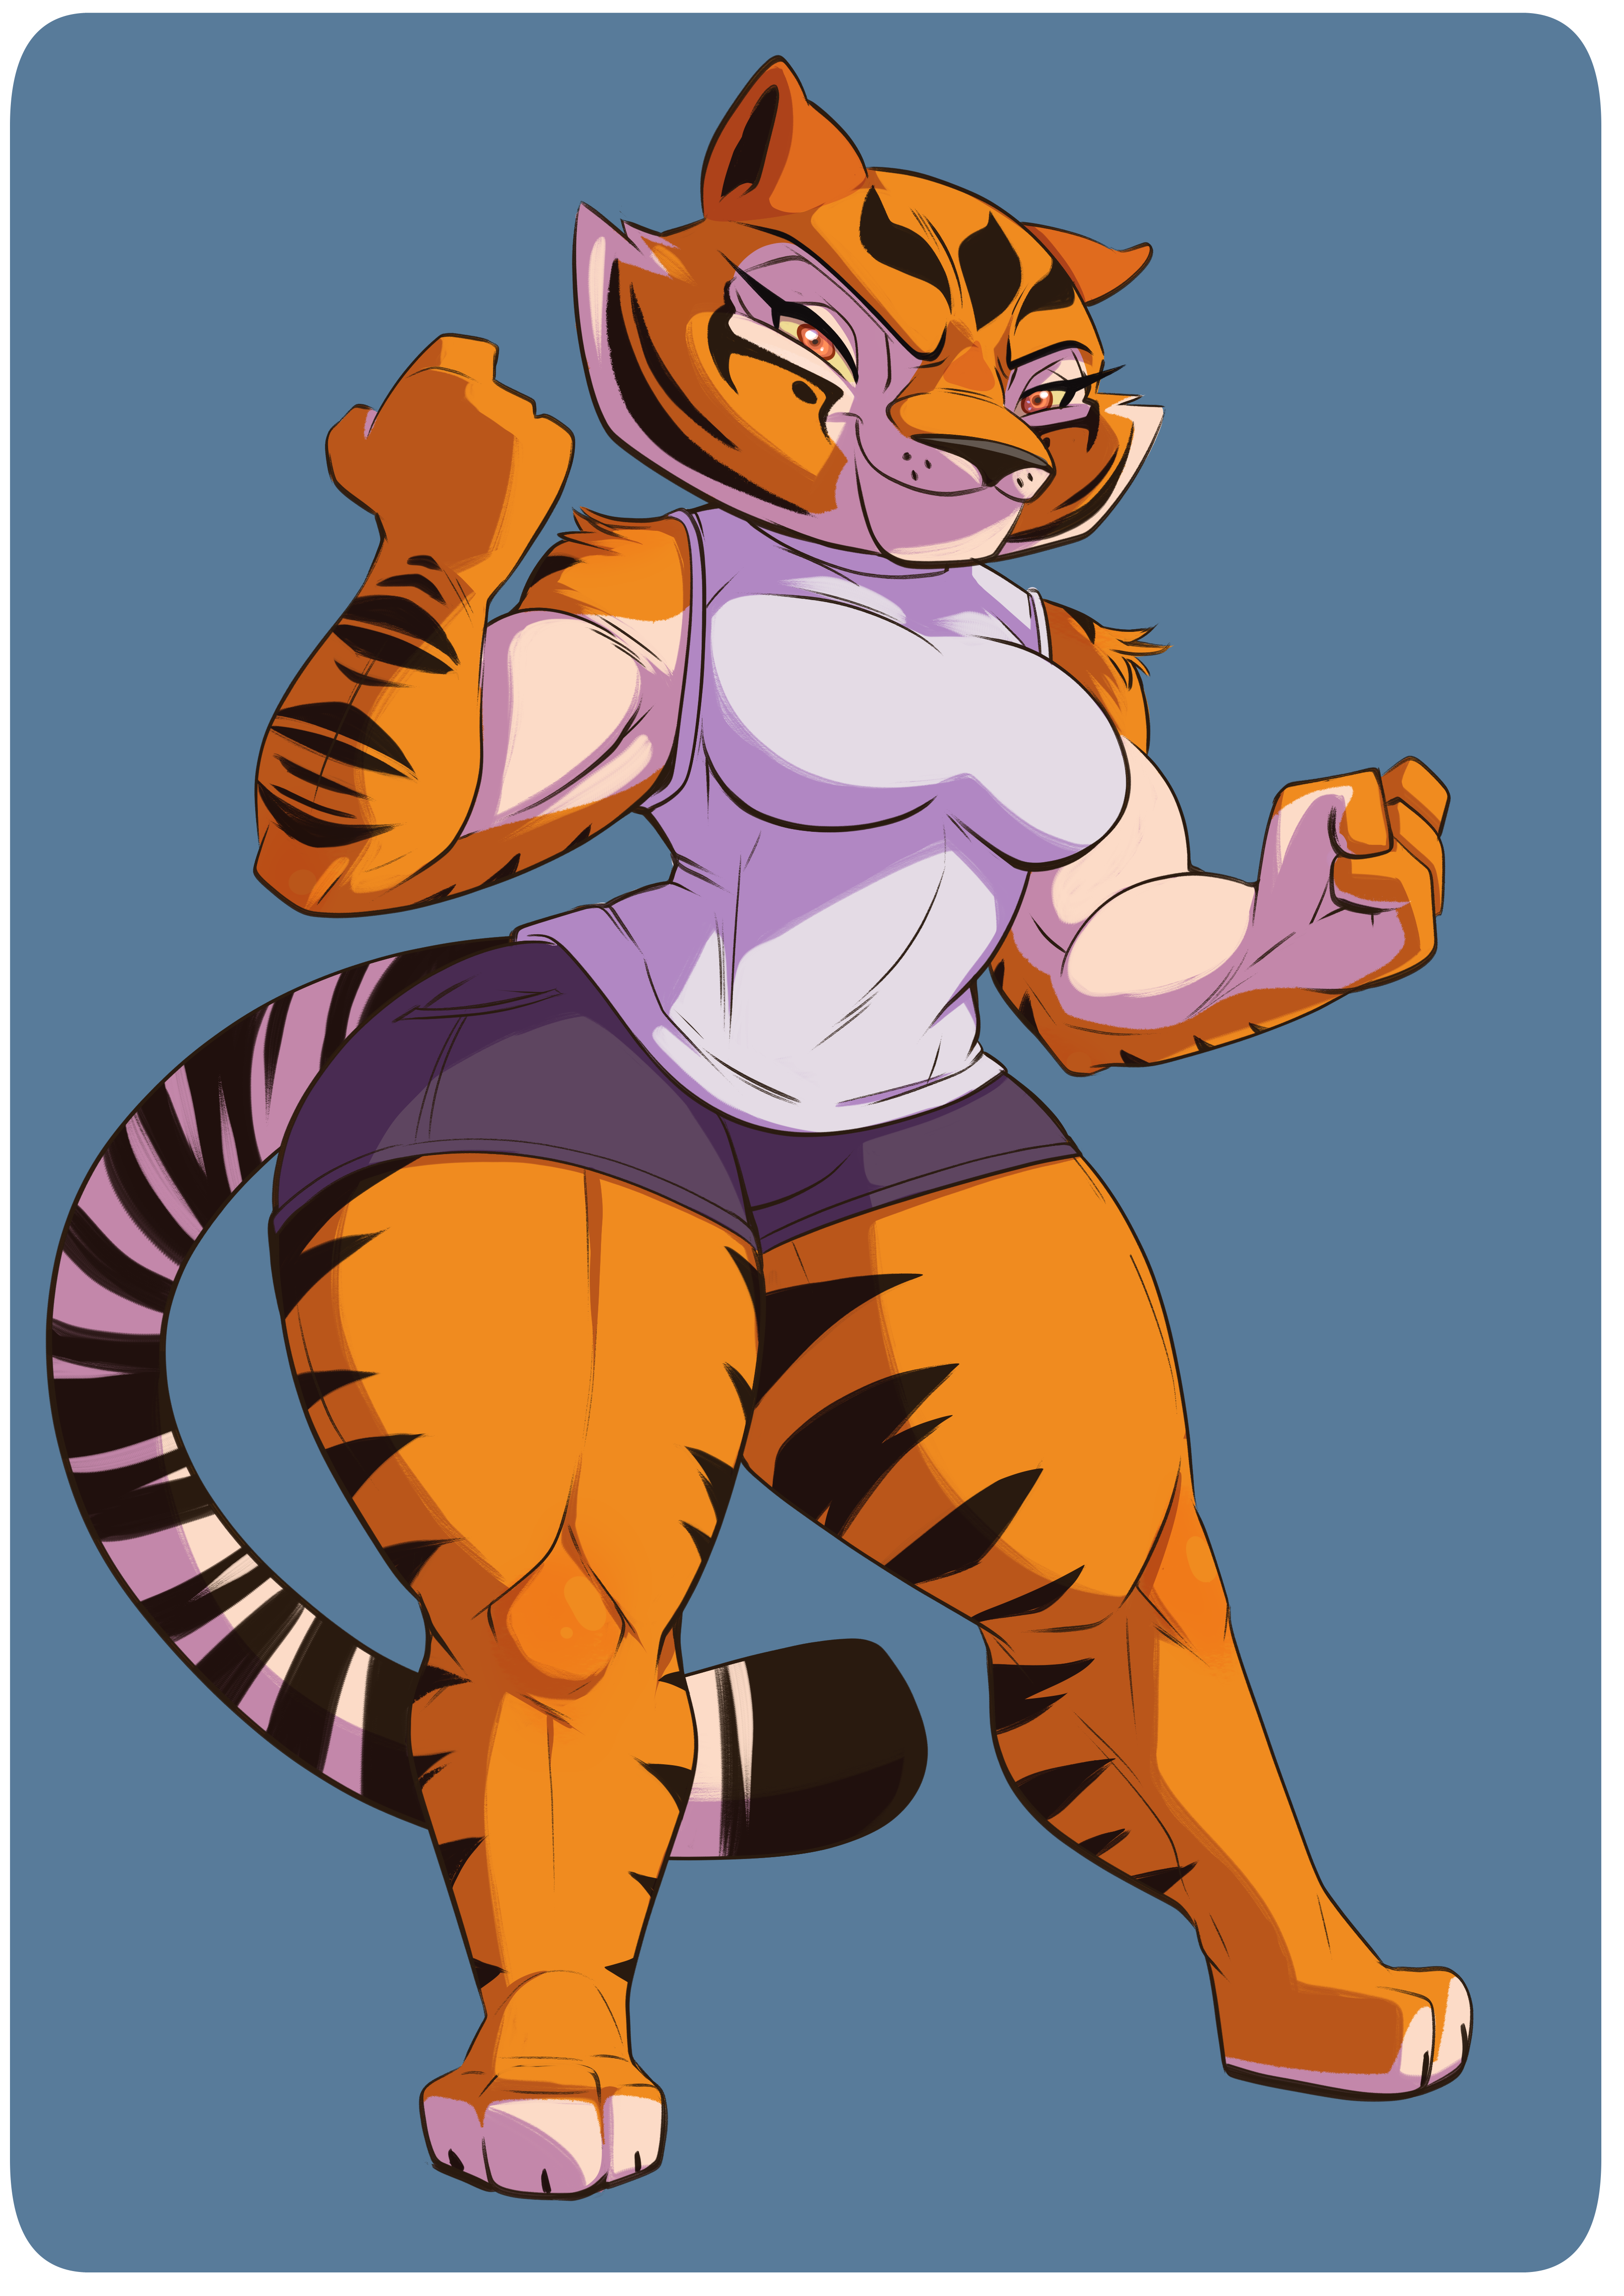 Anthro Thicc Related Keywords & Suggestions - Anthro Thicc L